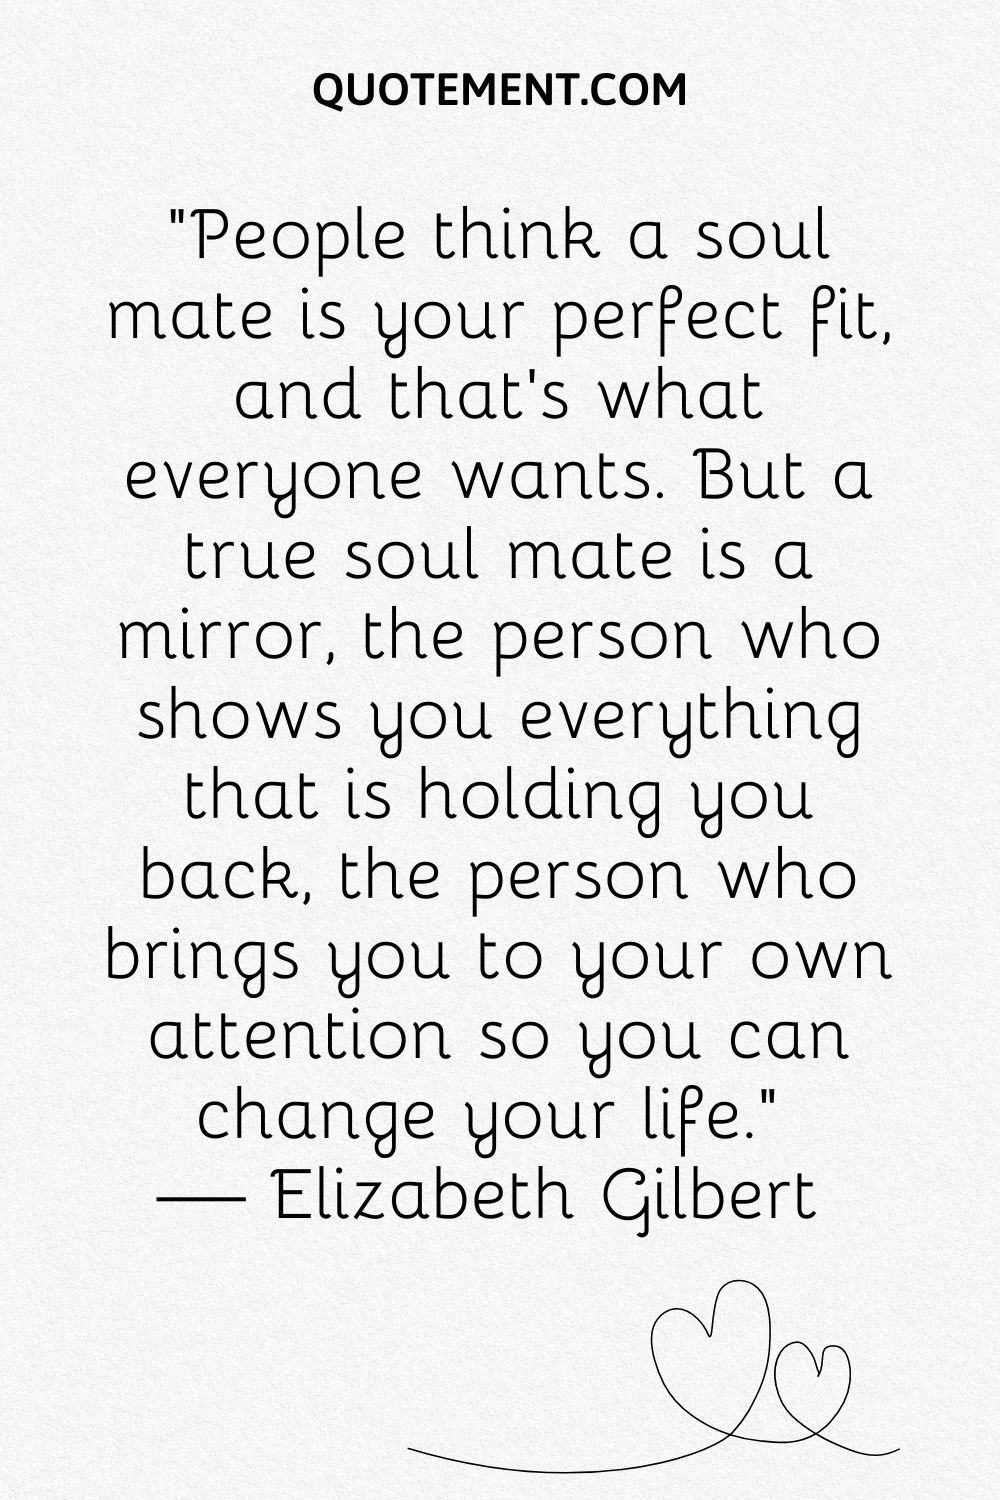 People think a soul mate is your perfect fit, and that’s what everyone wants